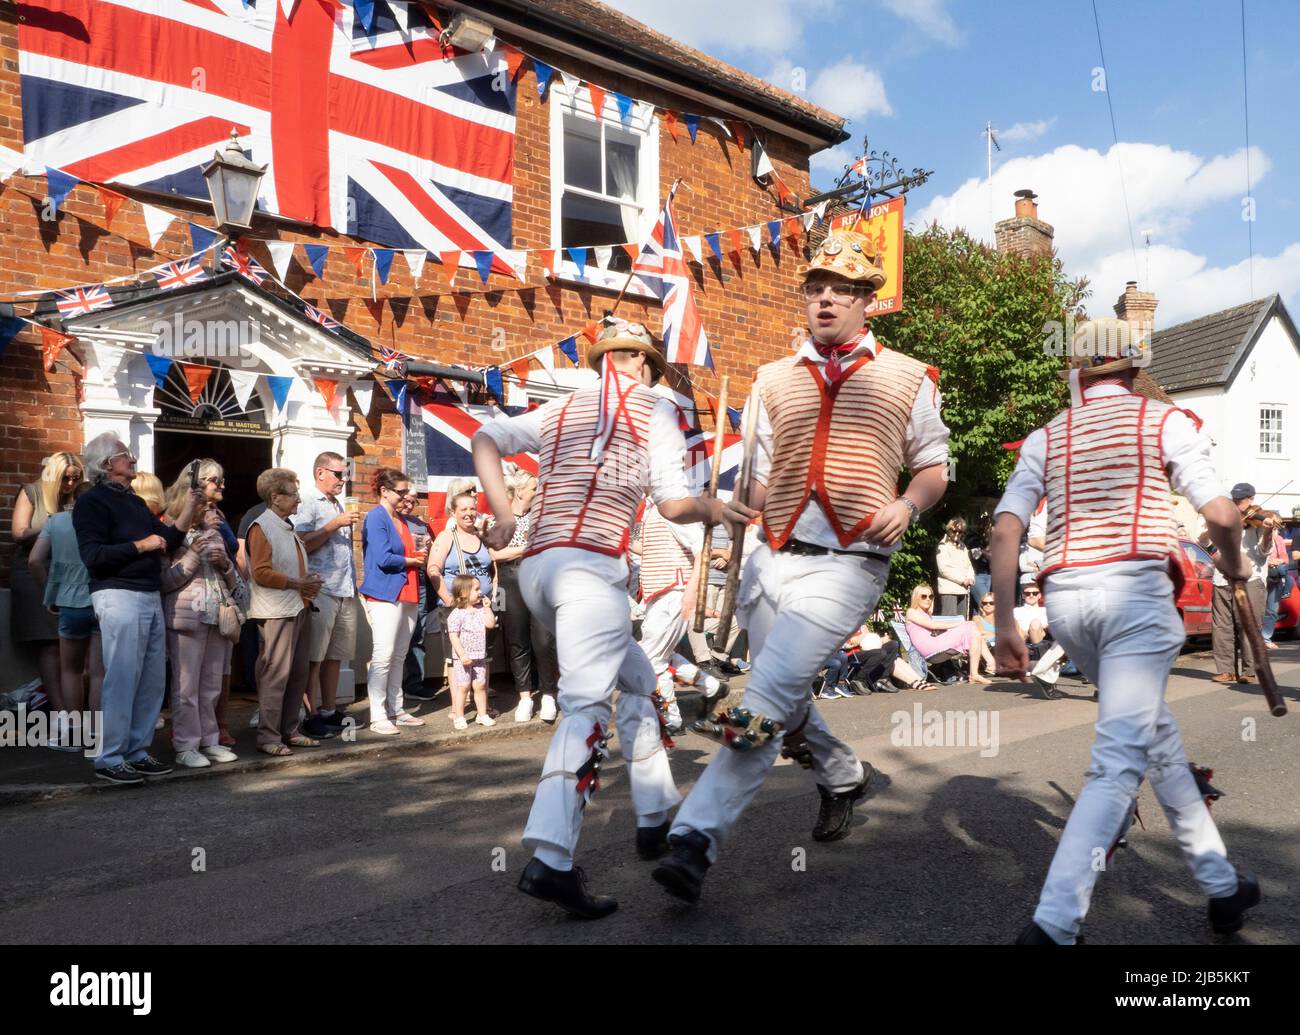 Steeple Bumpstead, Essex. 3rd June 2022. Morris Dancers from Thaxted perform outside The Red Lion public house in the quaint Essex village of Steeple Bumpstead as Jubilee celebrations continue. Credit: Jason Mitchell/Alamy Live News. Stock Photo